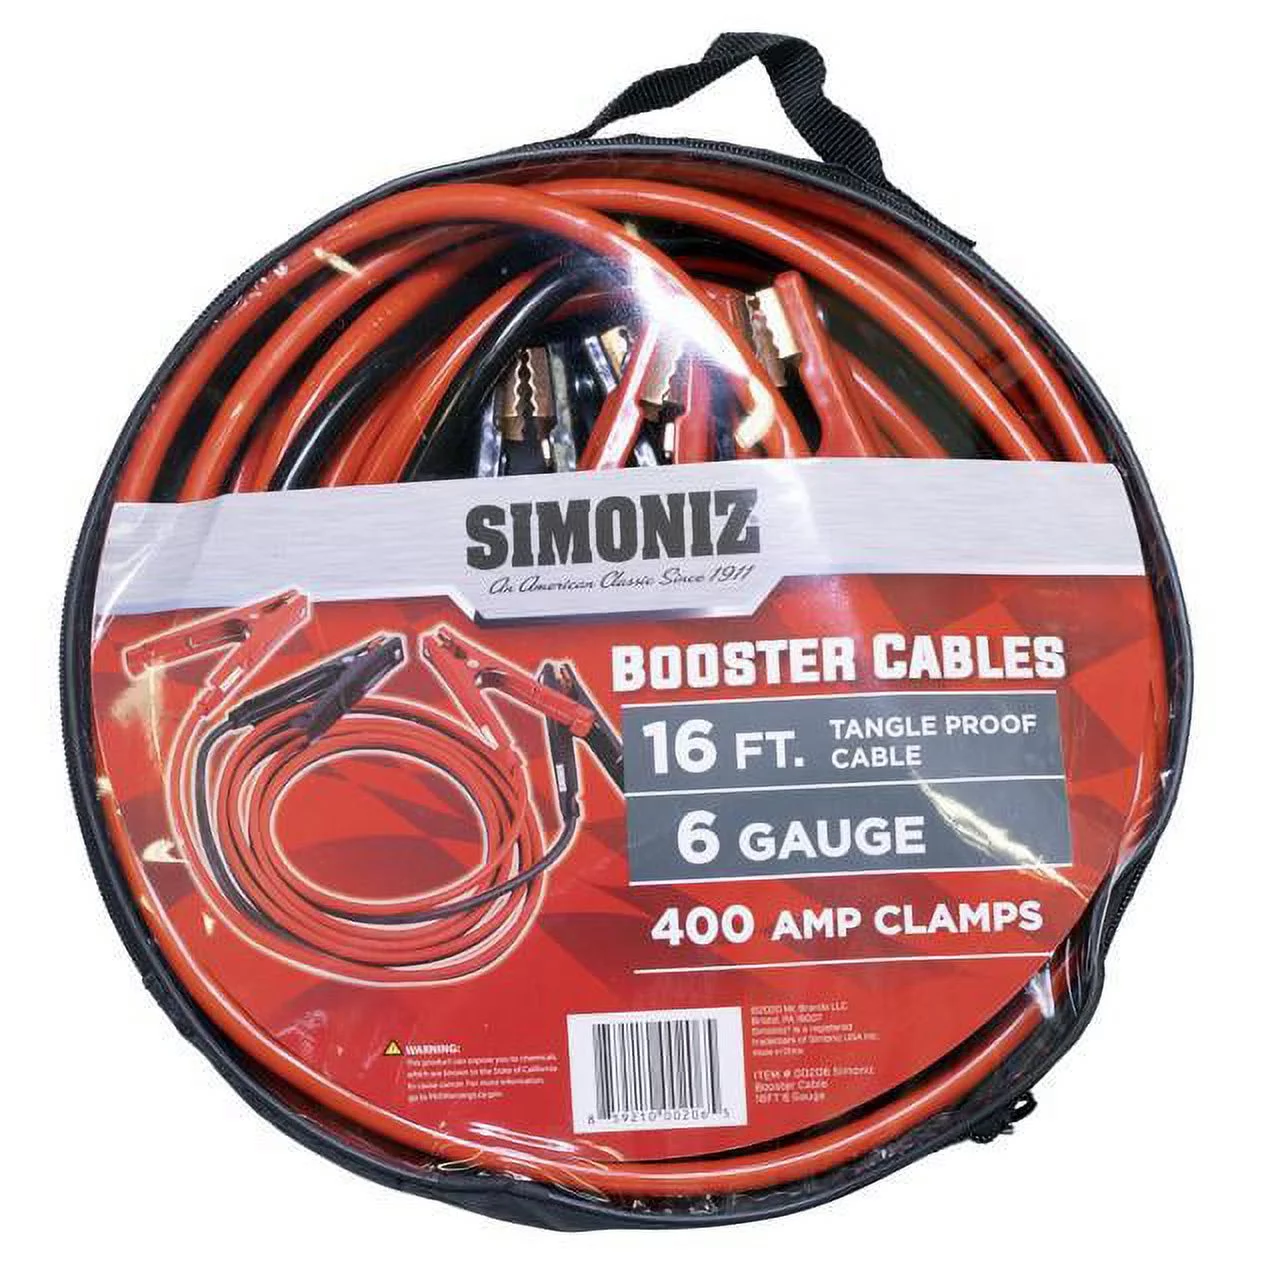 Booster Cable 16Ft 6 Gauge by Simoniz